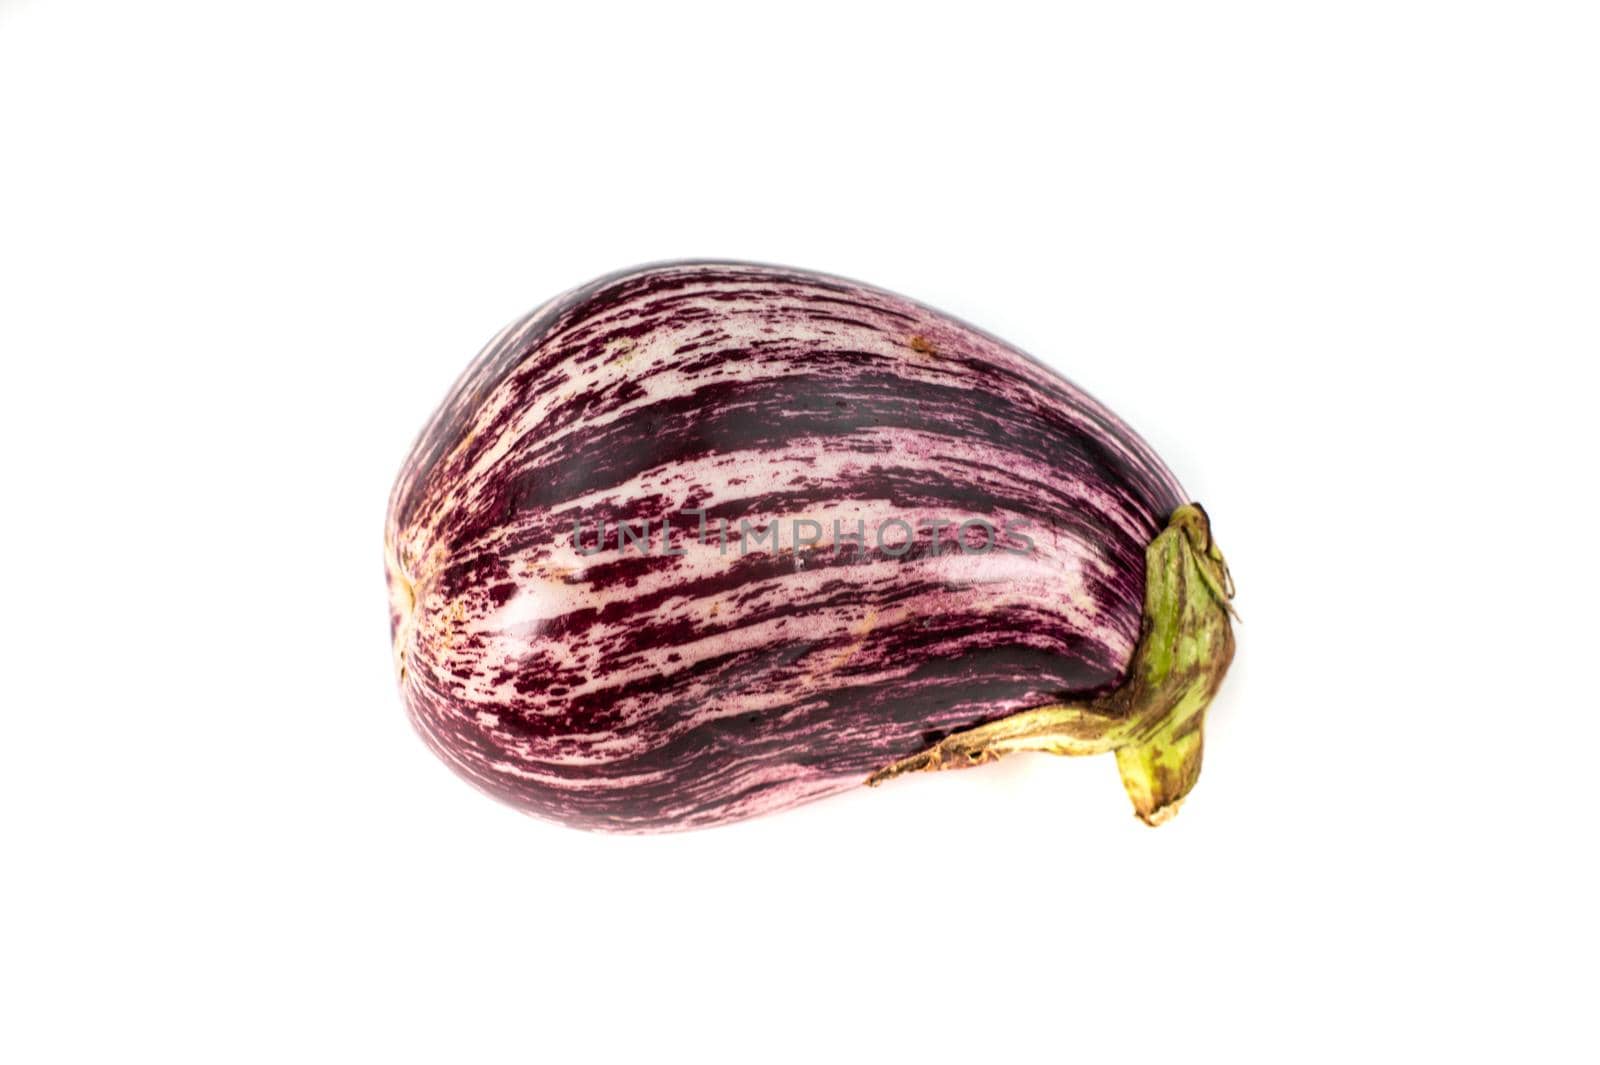 eggplant vegetable on white background by carfedeph